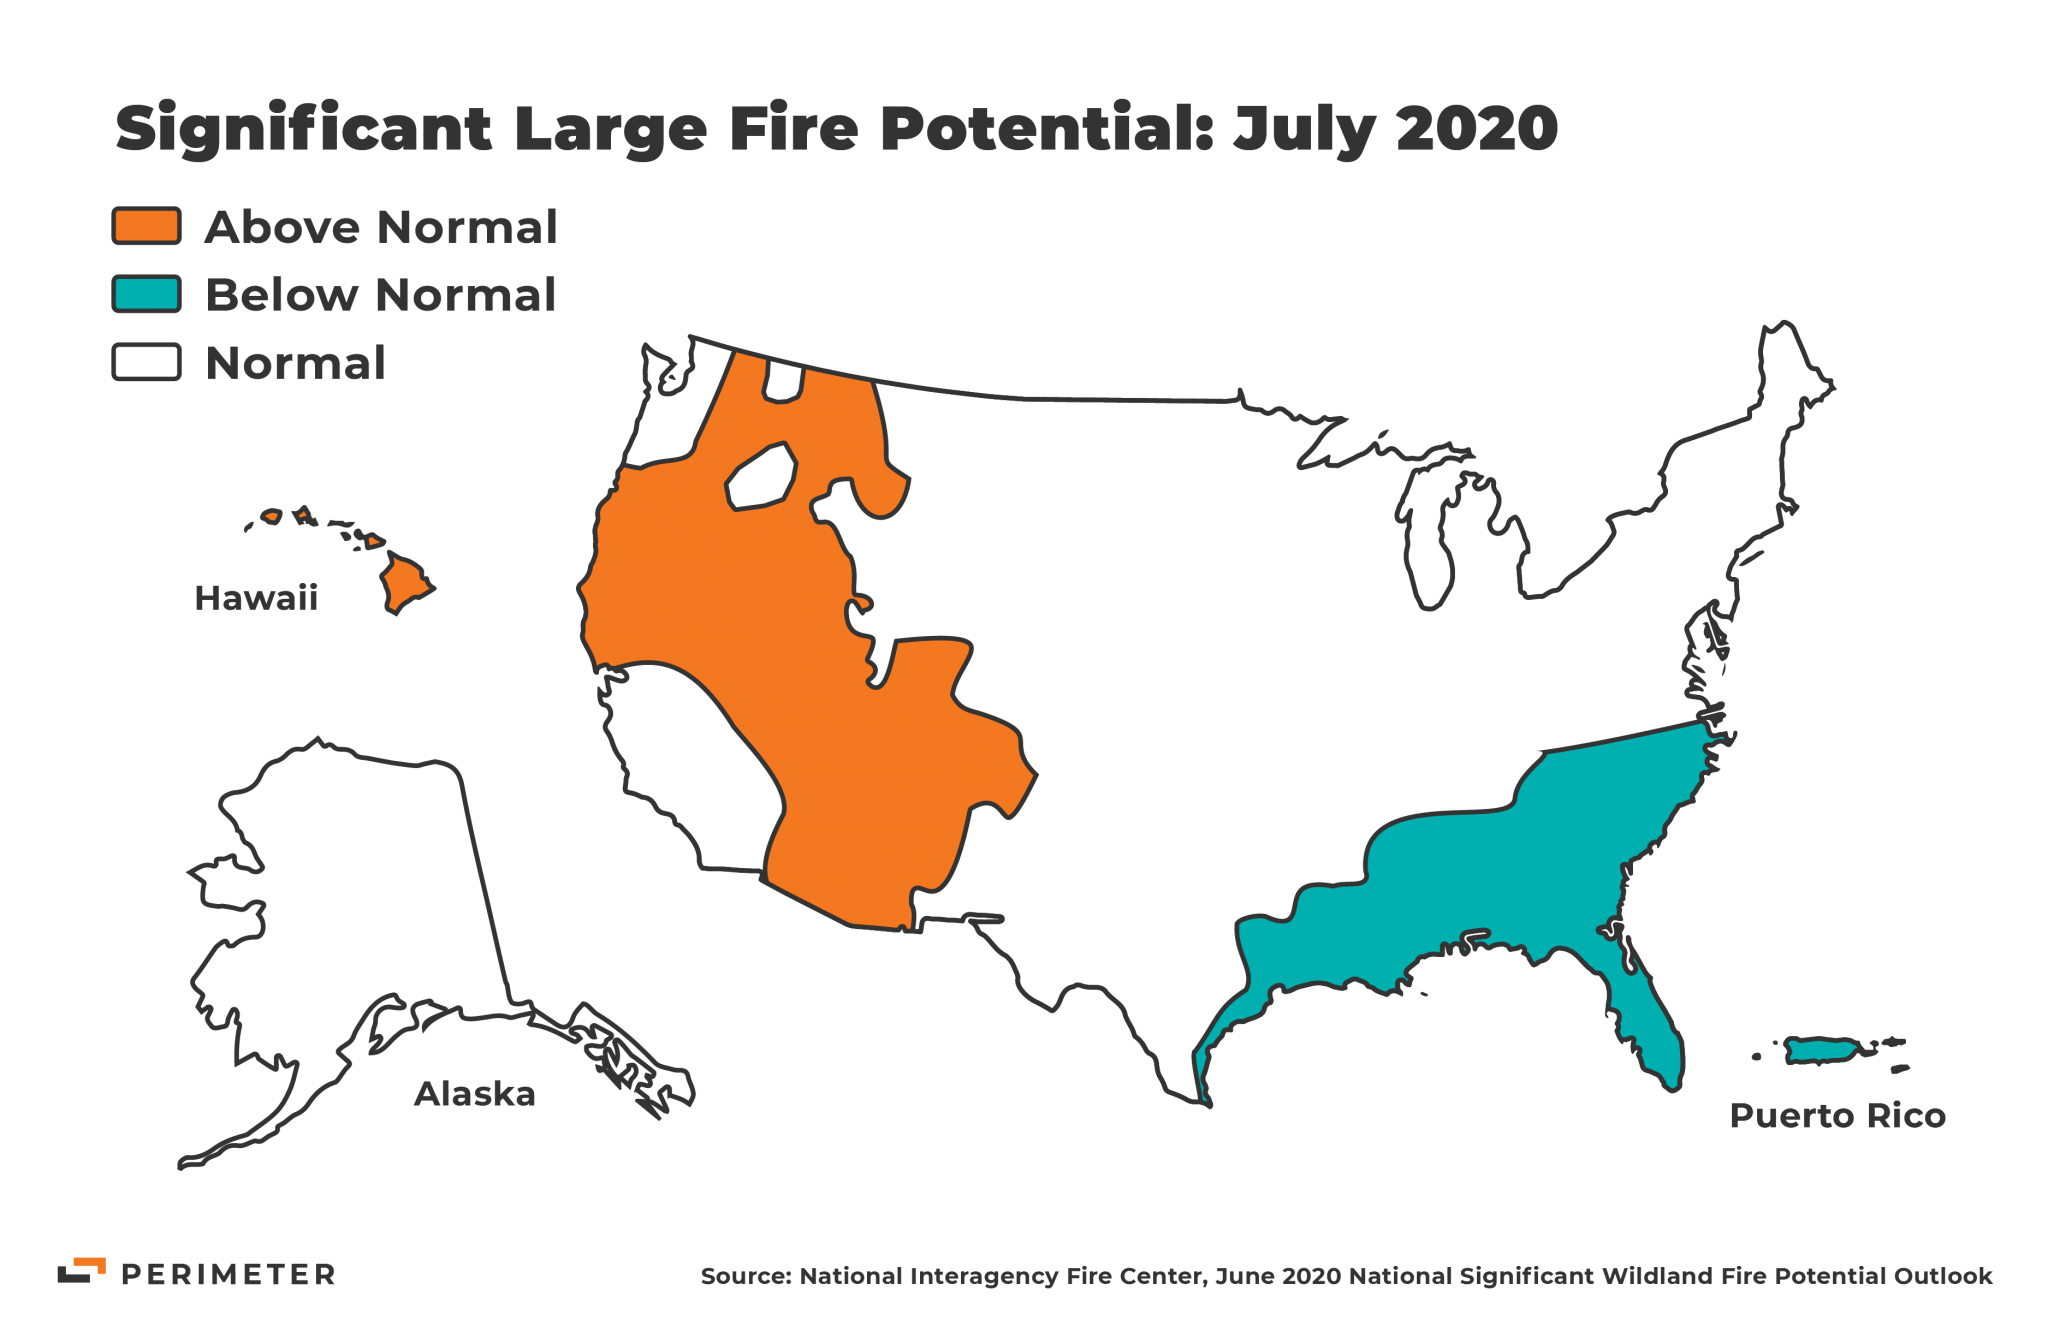 Map showing Above Normal, Below Normal, and Normal significant large fire potential risk zones for the United States in July 2020. 